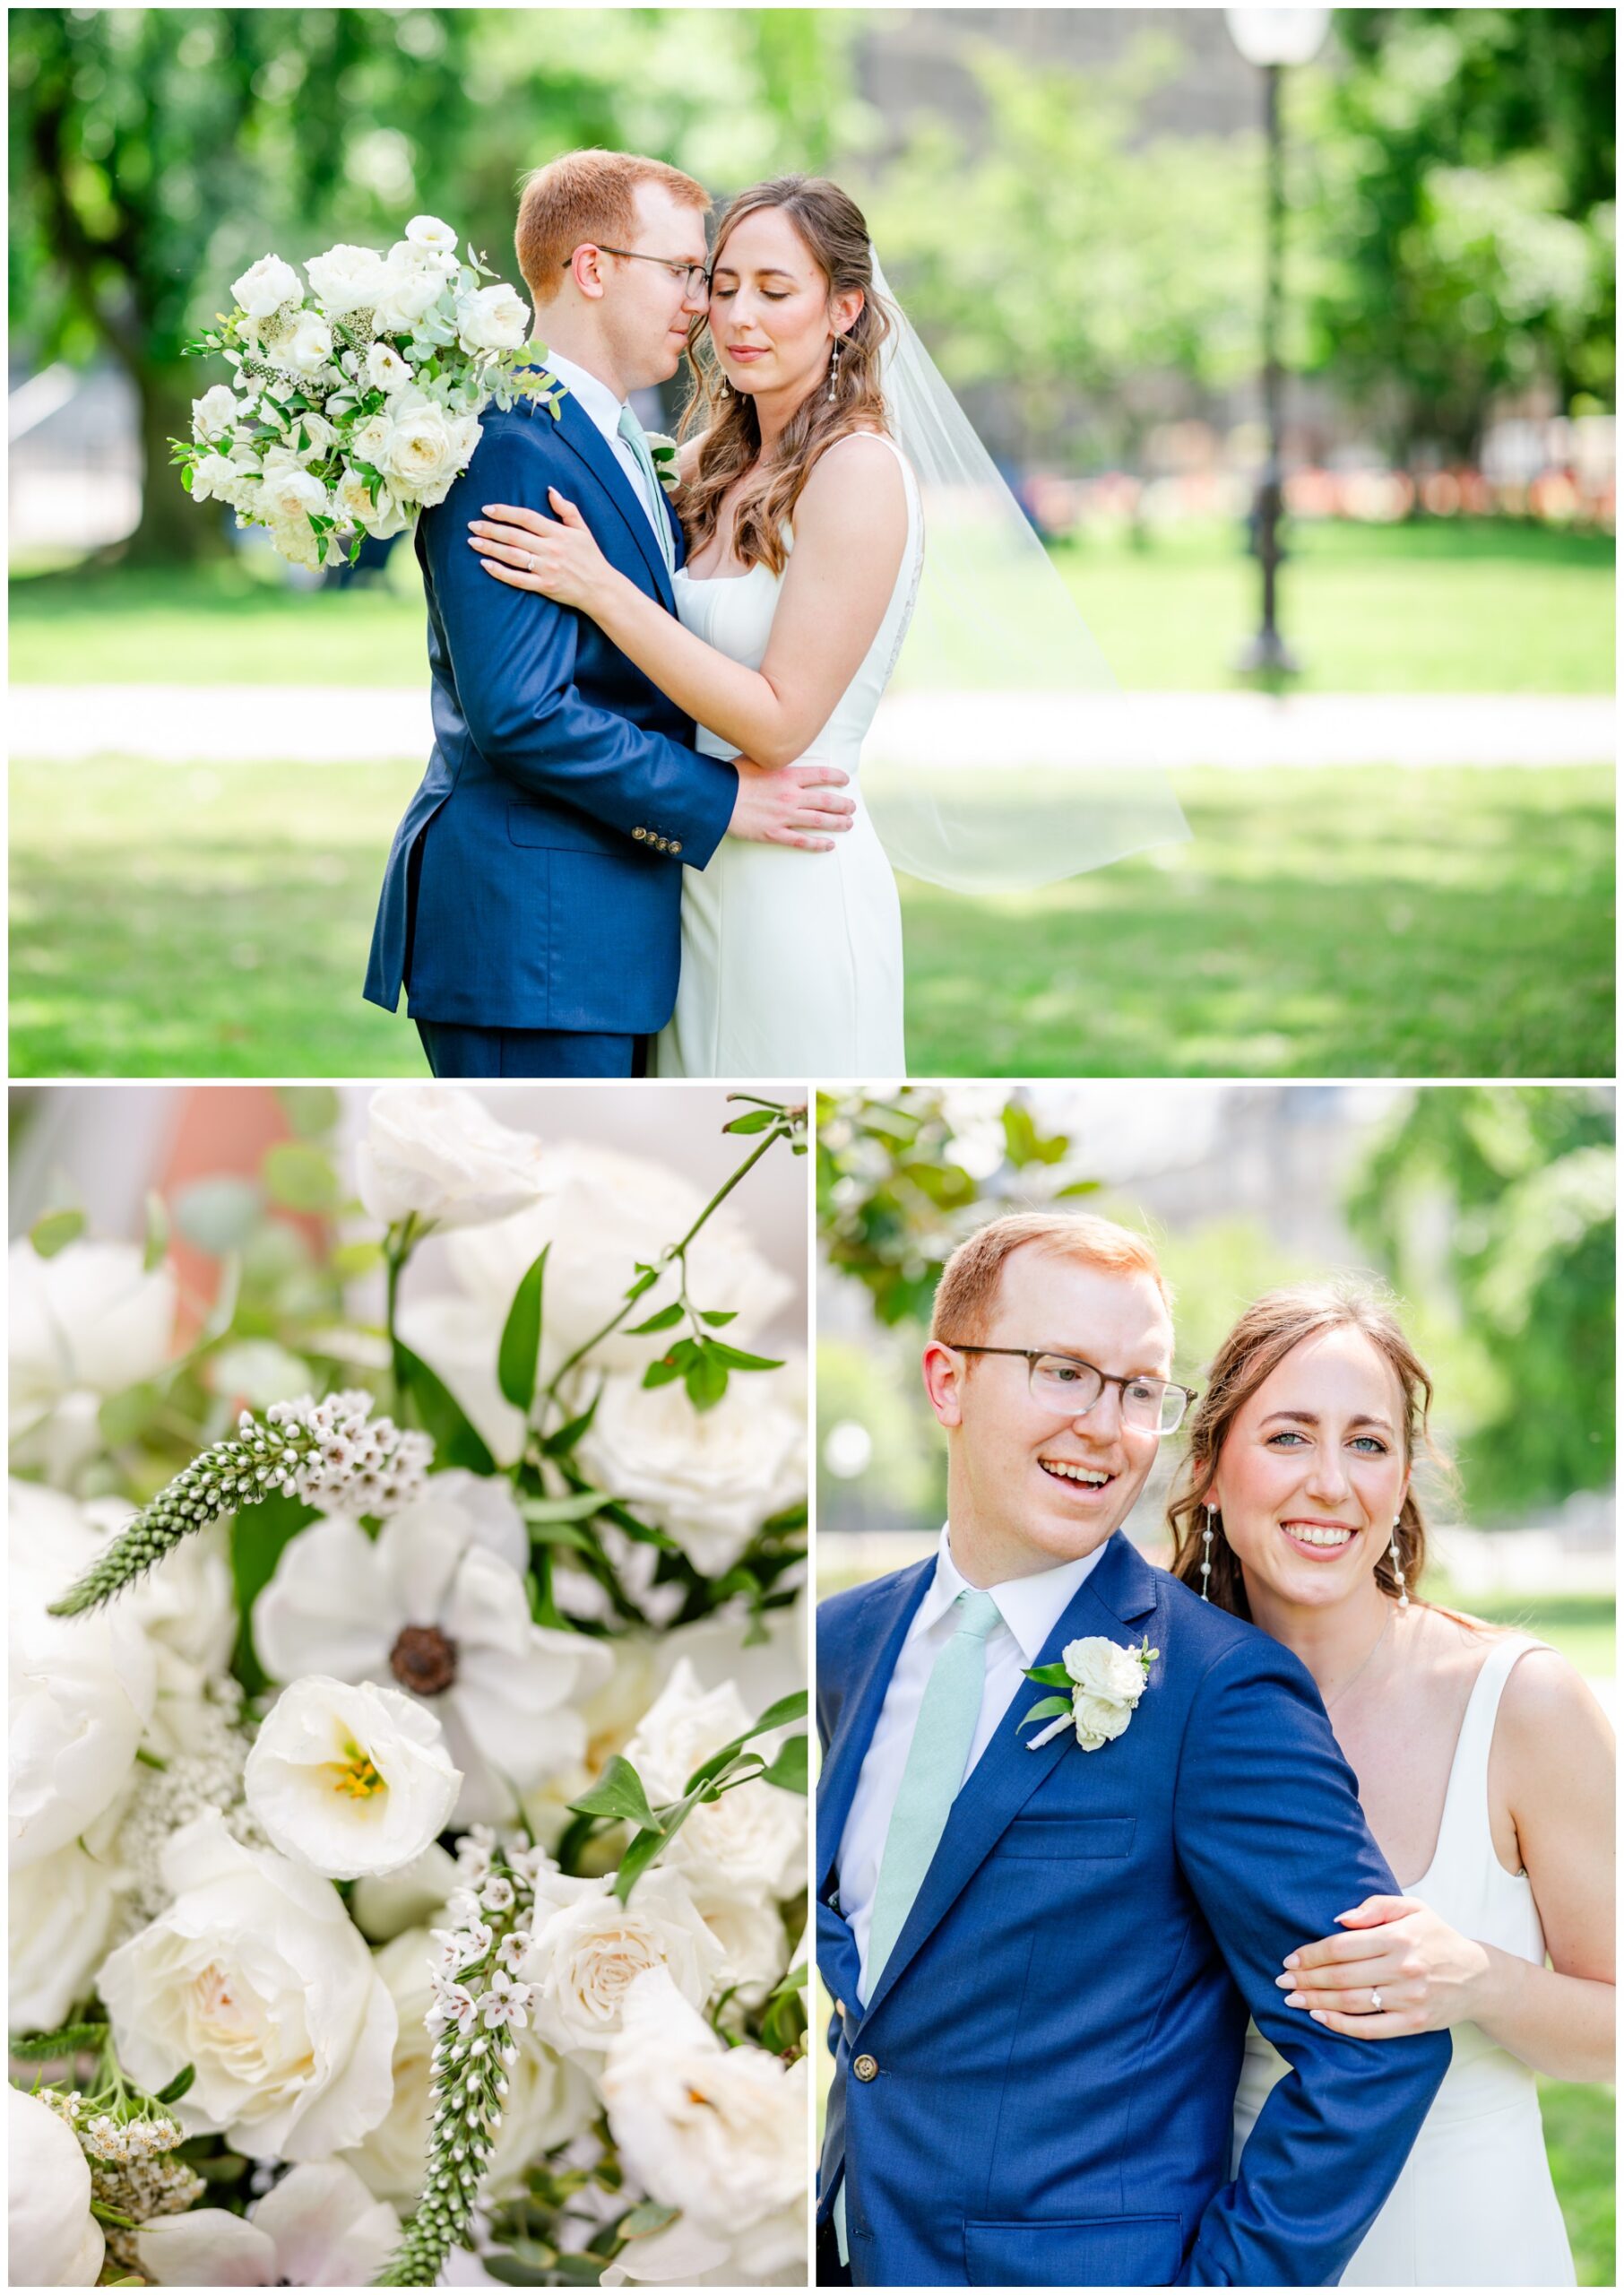 Washington D.C. summer wedding, Toolbox Washington D.C., Dupont Circle wedding venue, summer wedding aesthetic, summer wedding portraits, sage green aesthetic, Washington D.C. wedding photography, D.C. wedding photographer, Rachel E.H. Photography, Georgetown University portraits, Georgetown portraits, white bouquet, couple smiling, bride and groom hugging, Carolyn Thombs hair and makeup